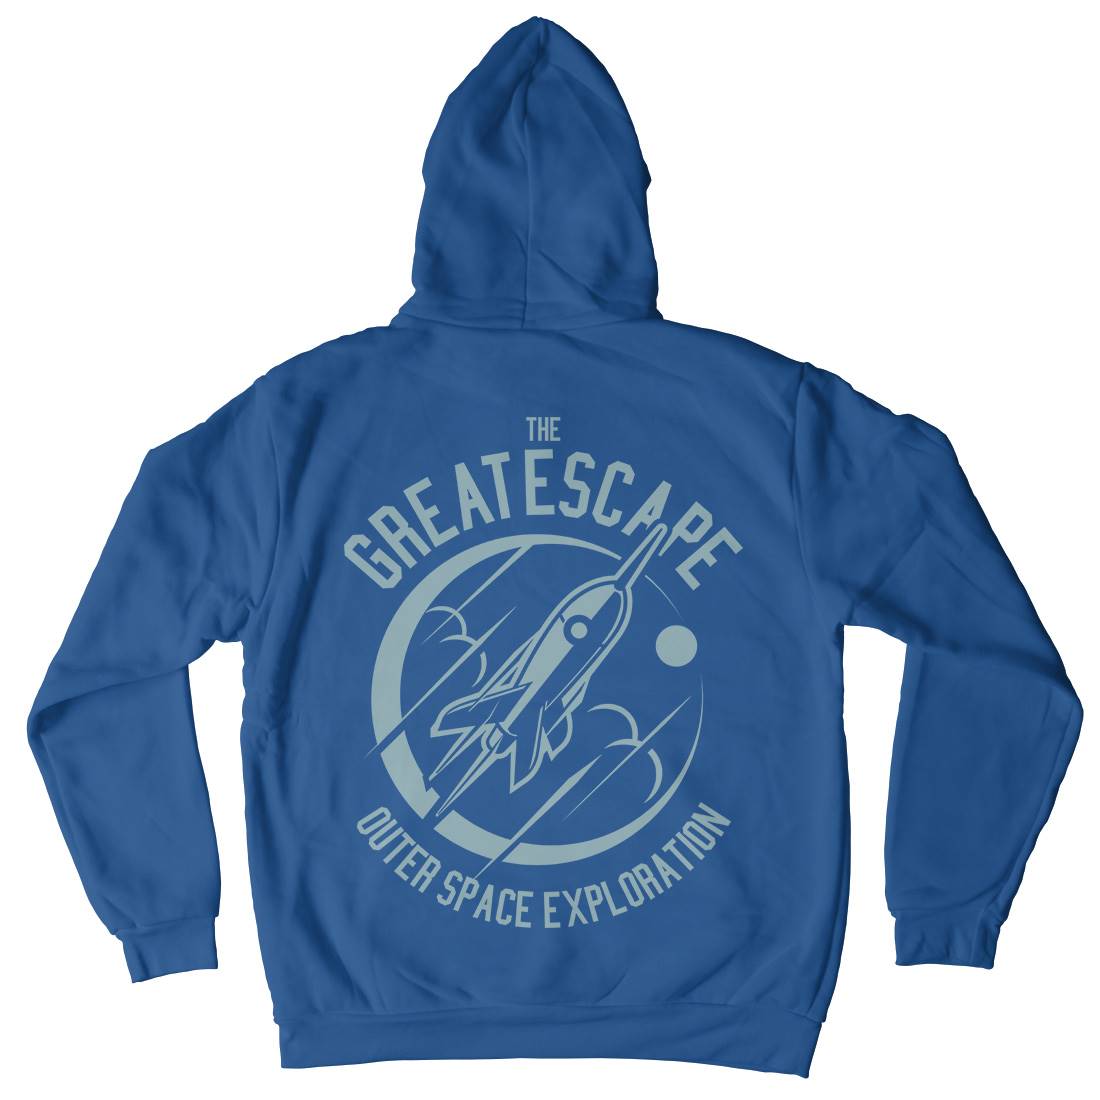 Great Escape Mens Hoodie With Pocket Space A292